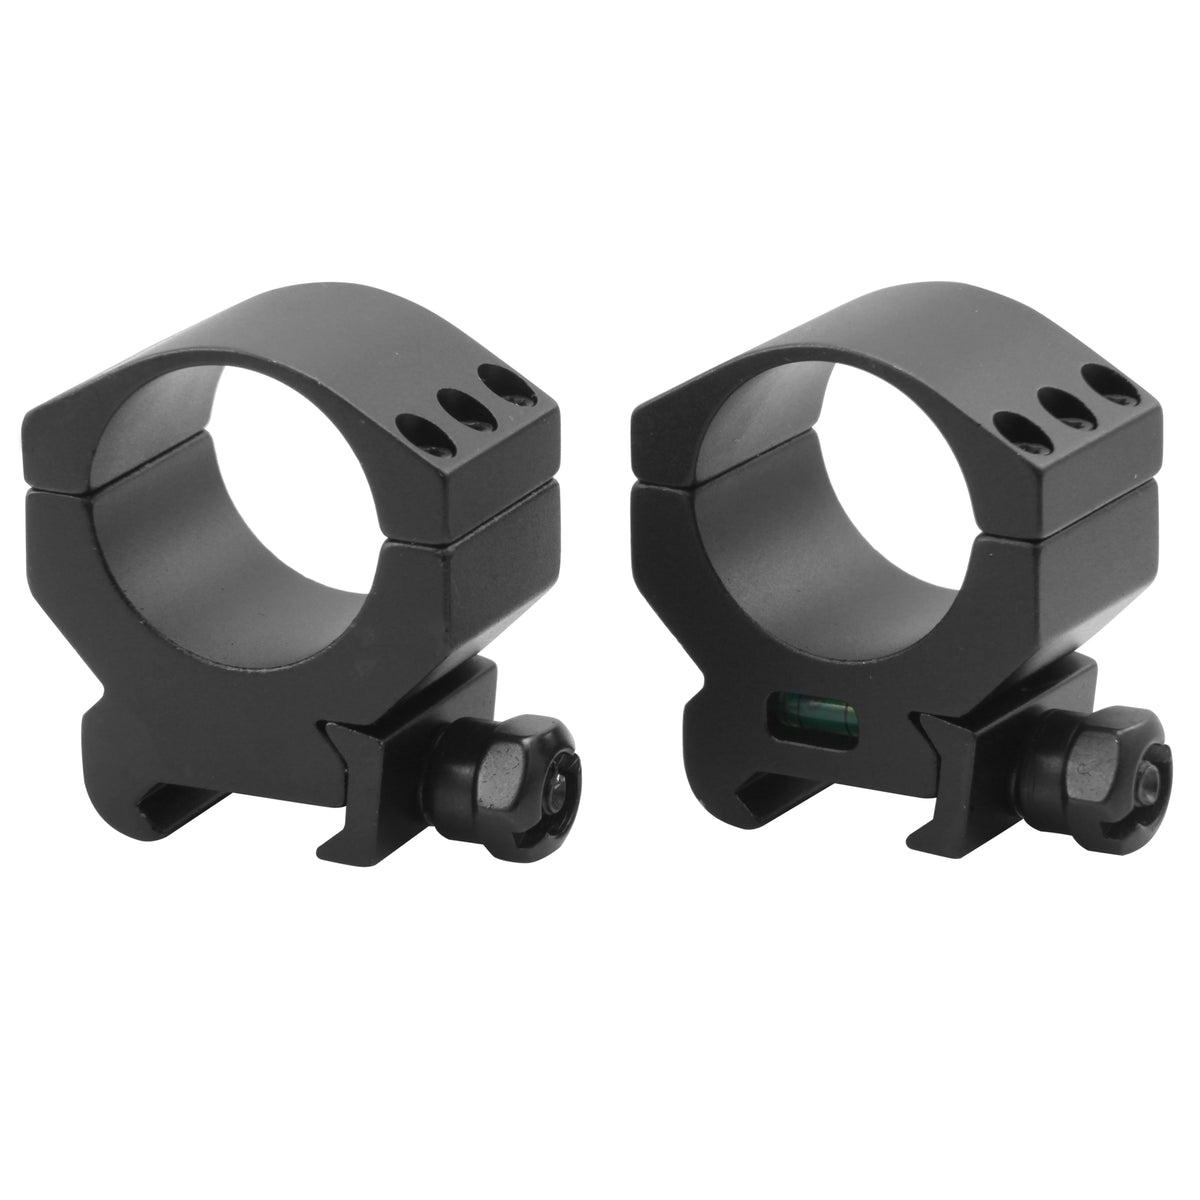 CCOP USA 30mm Tactical Anti-Cant Scope Rings Mount Level High Profile A-B3003WH 